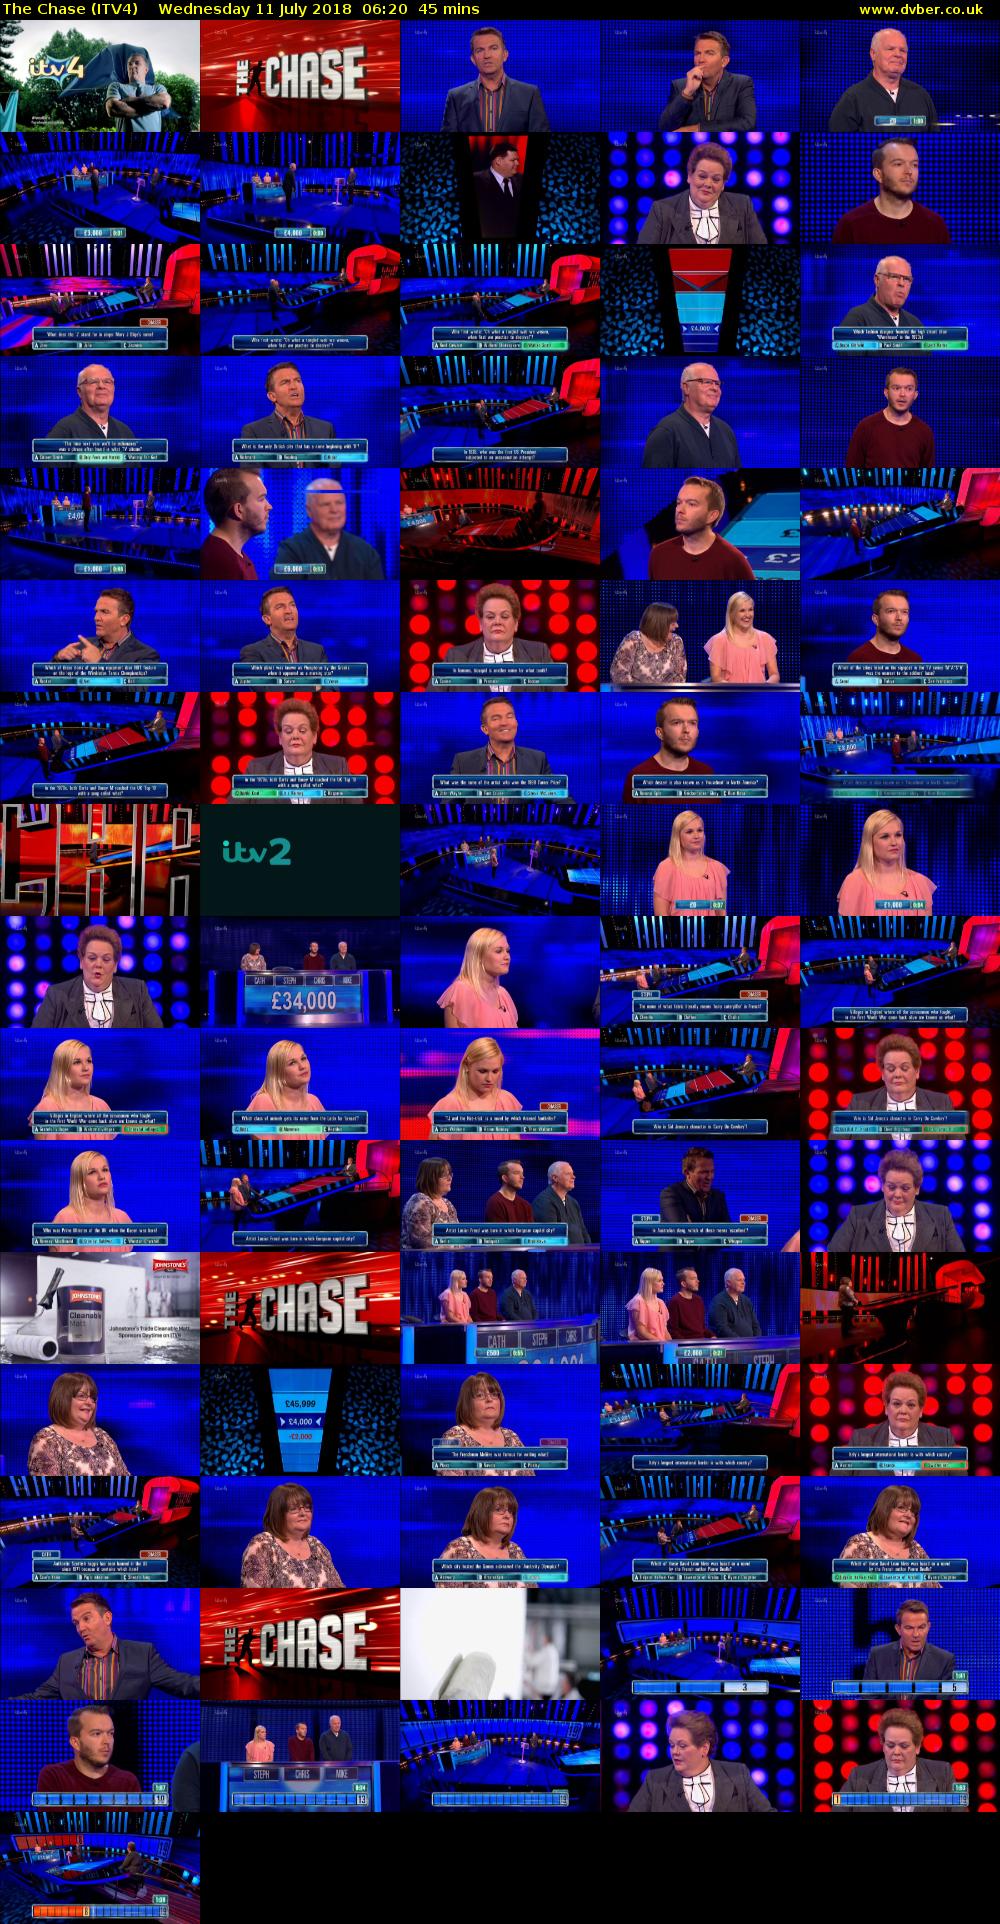 The Chase (ITV4) Wednesday 11 July 2018 06:20 - 07:05